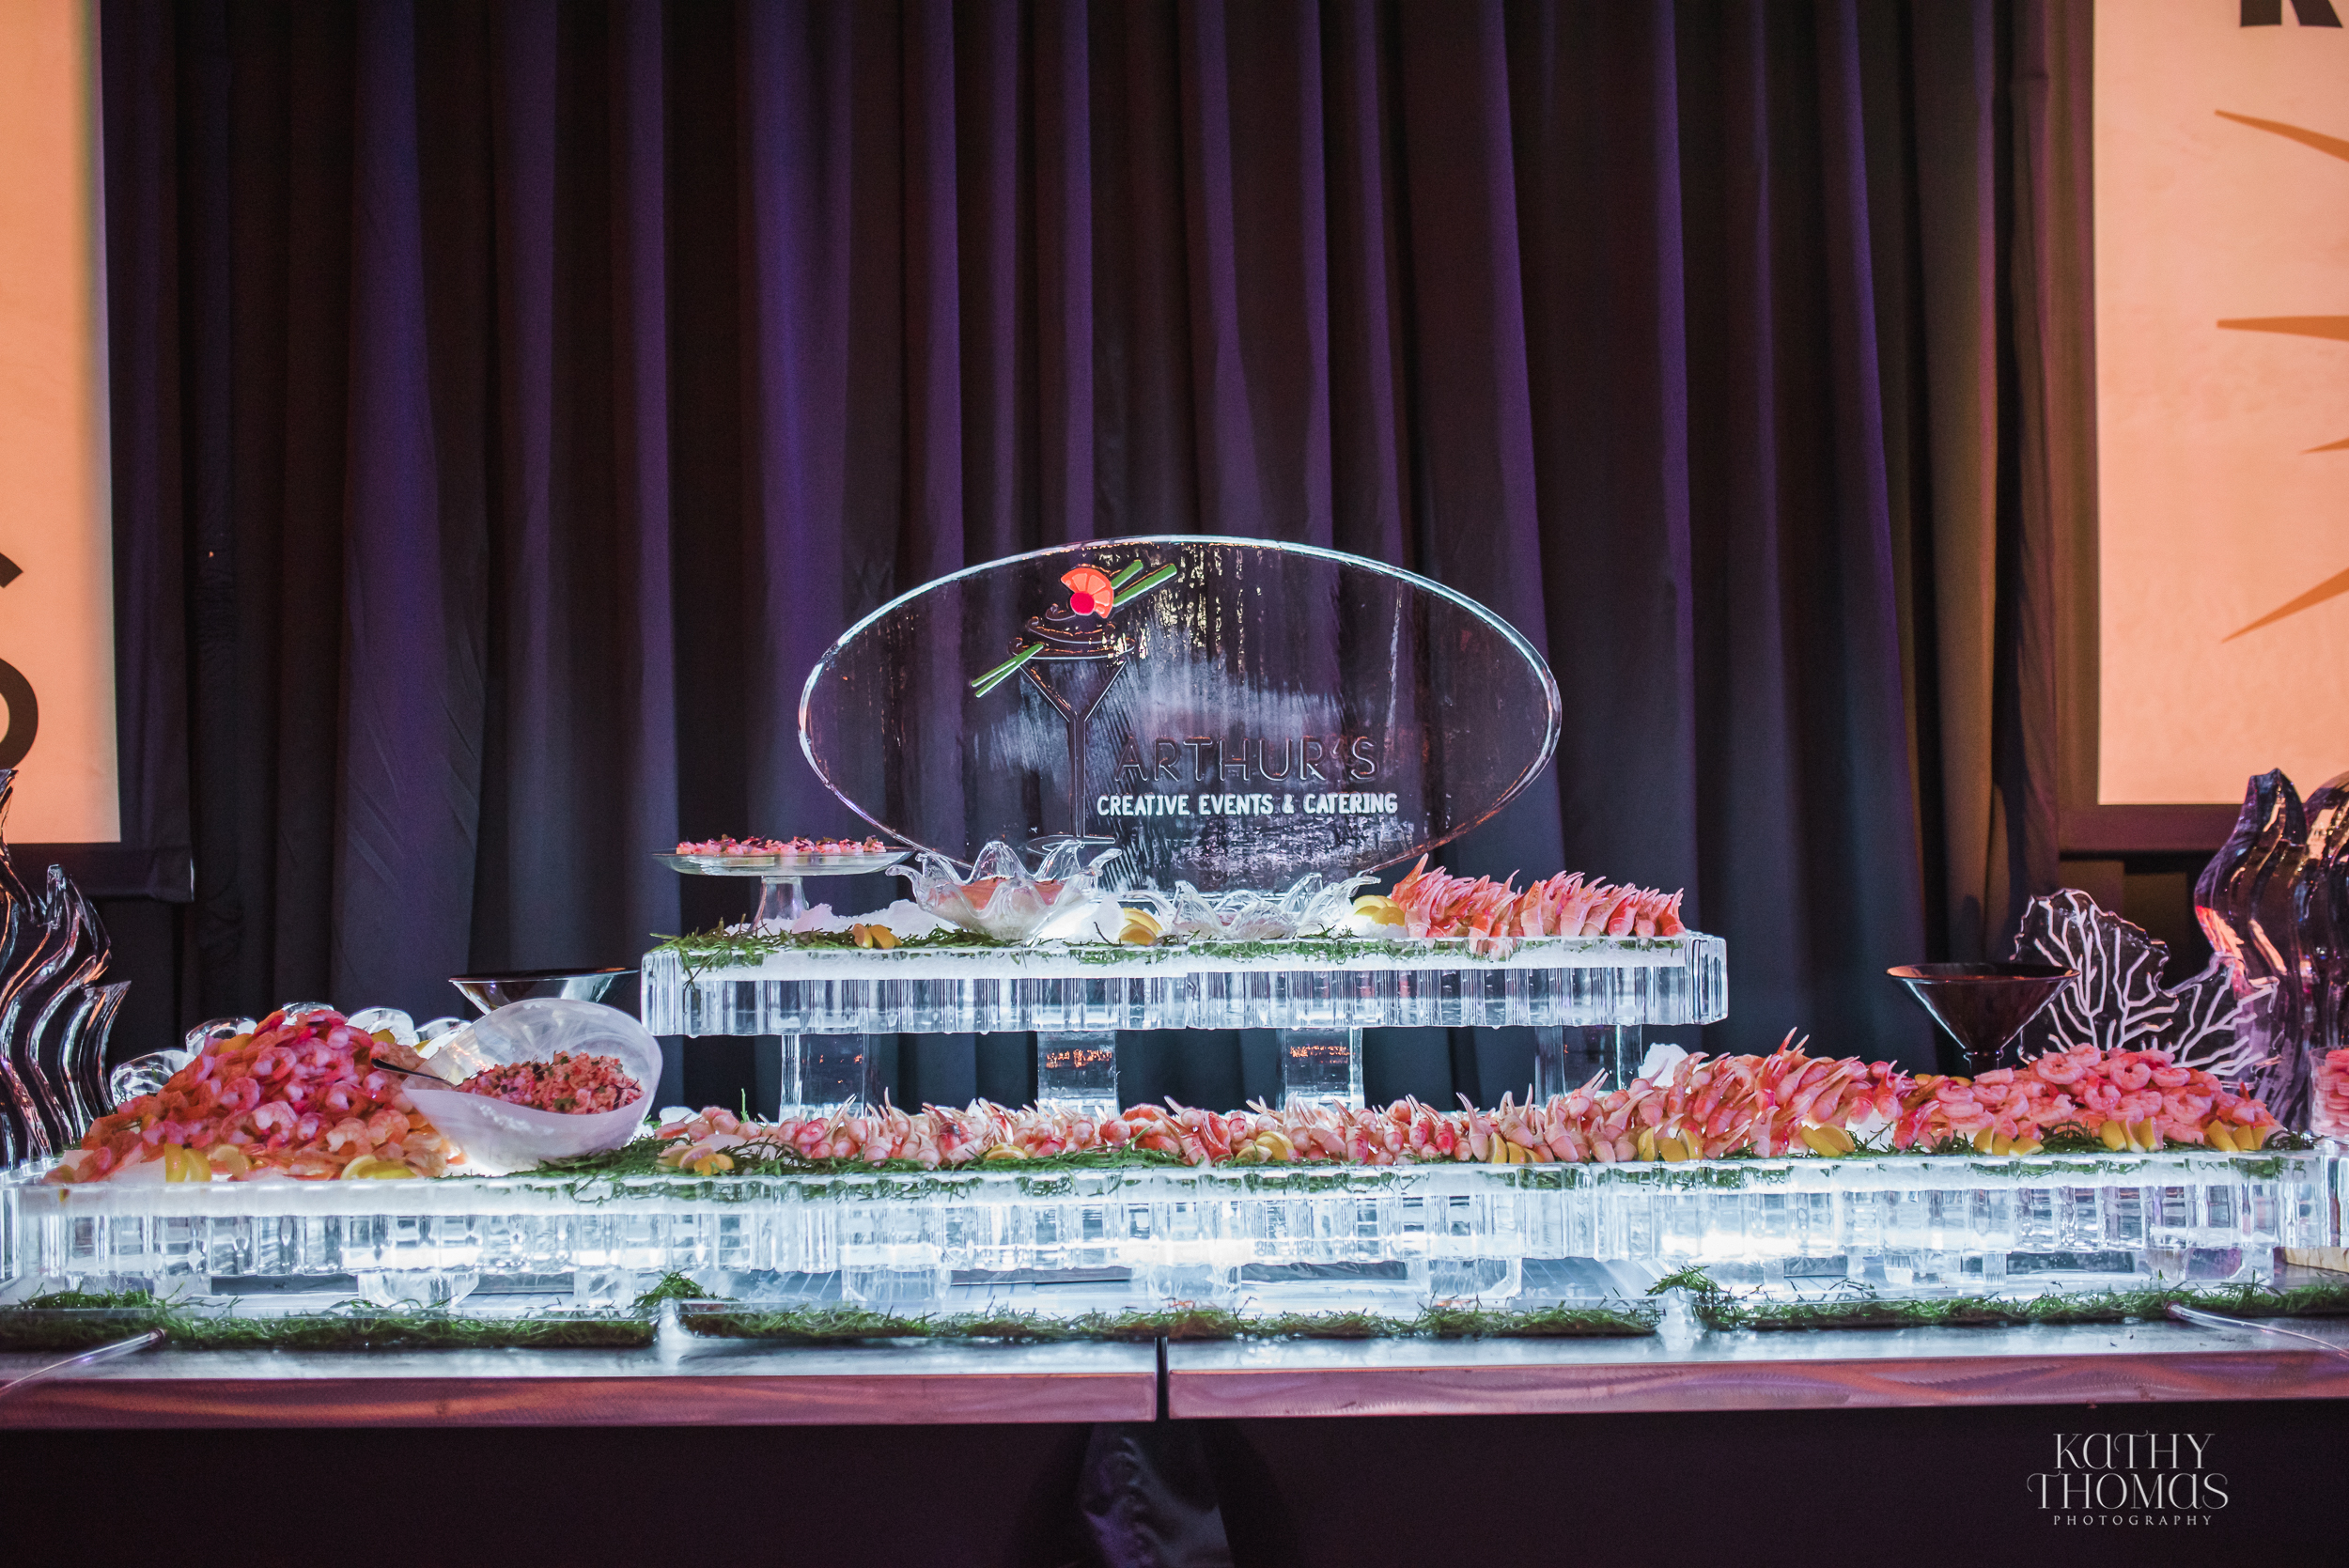 Arthur's Catering | Seafood Display | Ice Sculpture | Orlando Event Planner